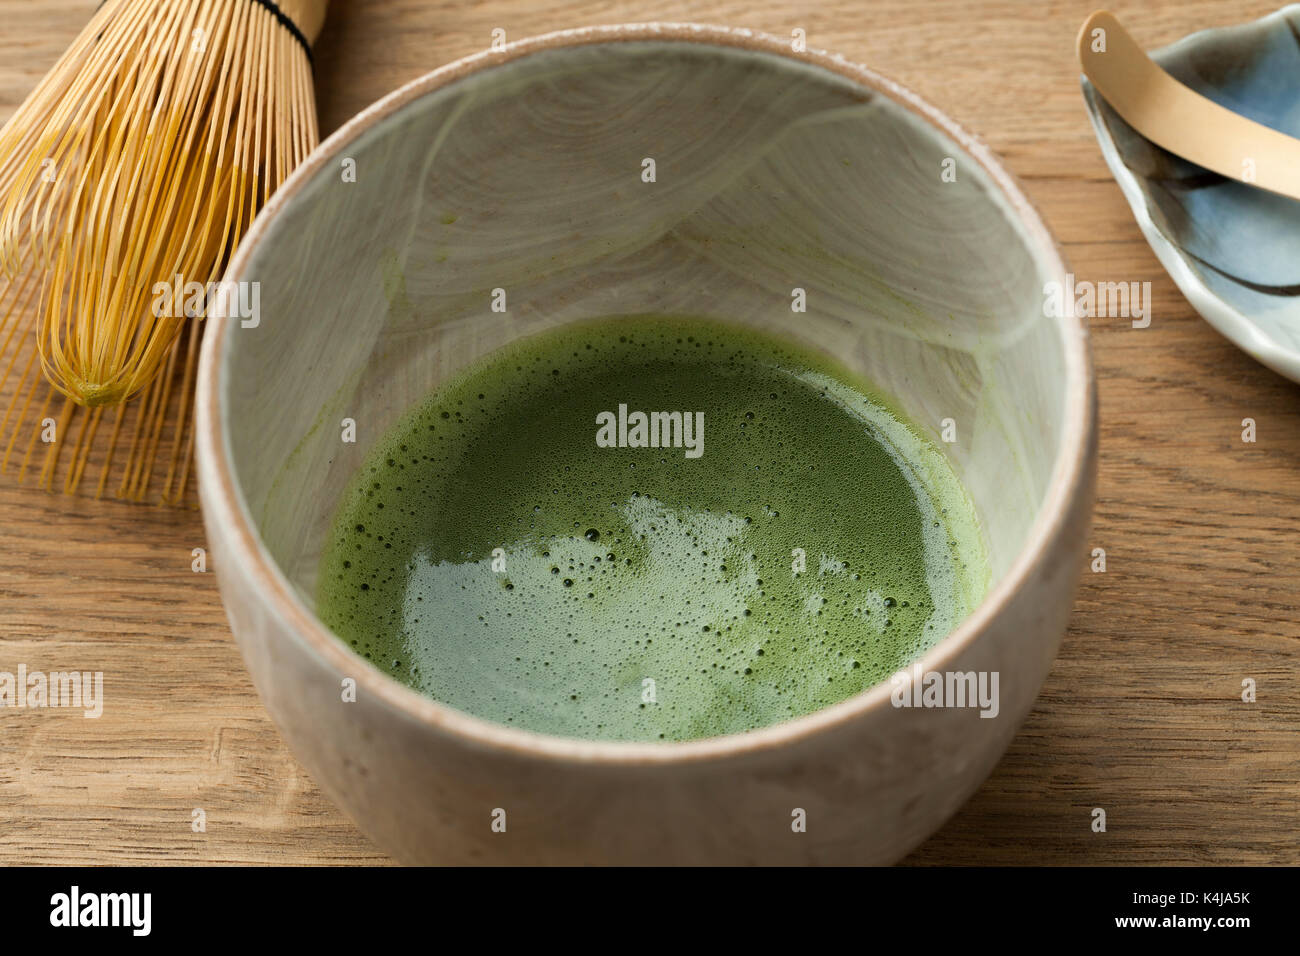 Preparing a bowl of matcha tea with a tea whisk Stock Photo